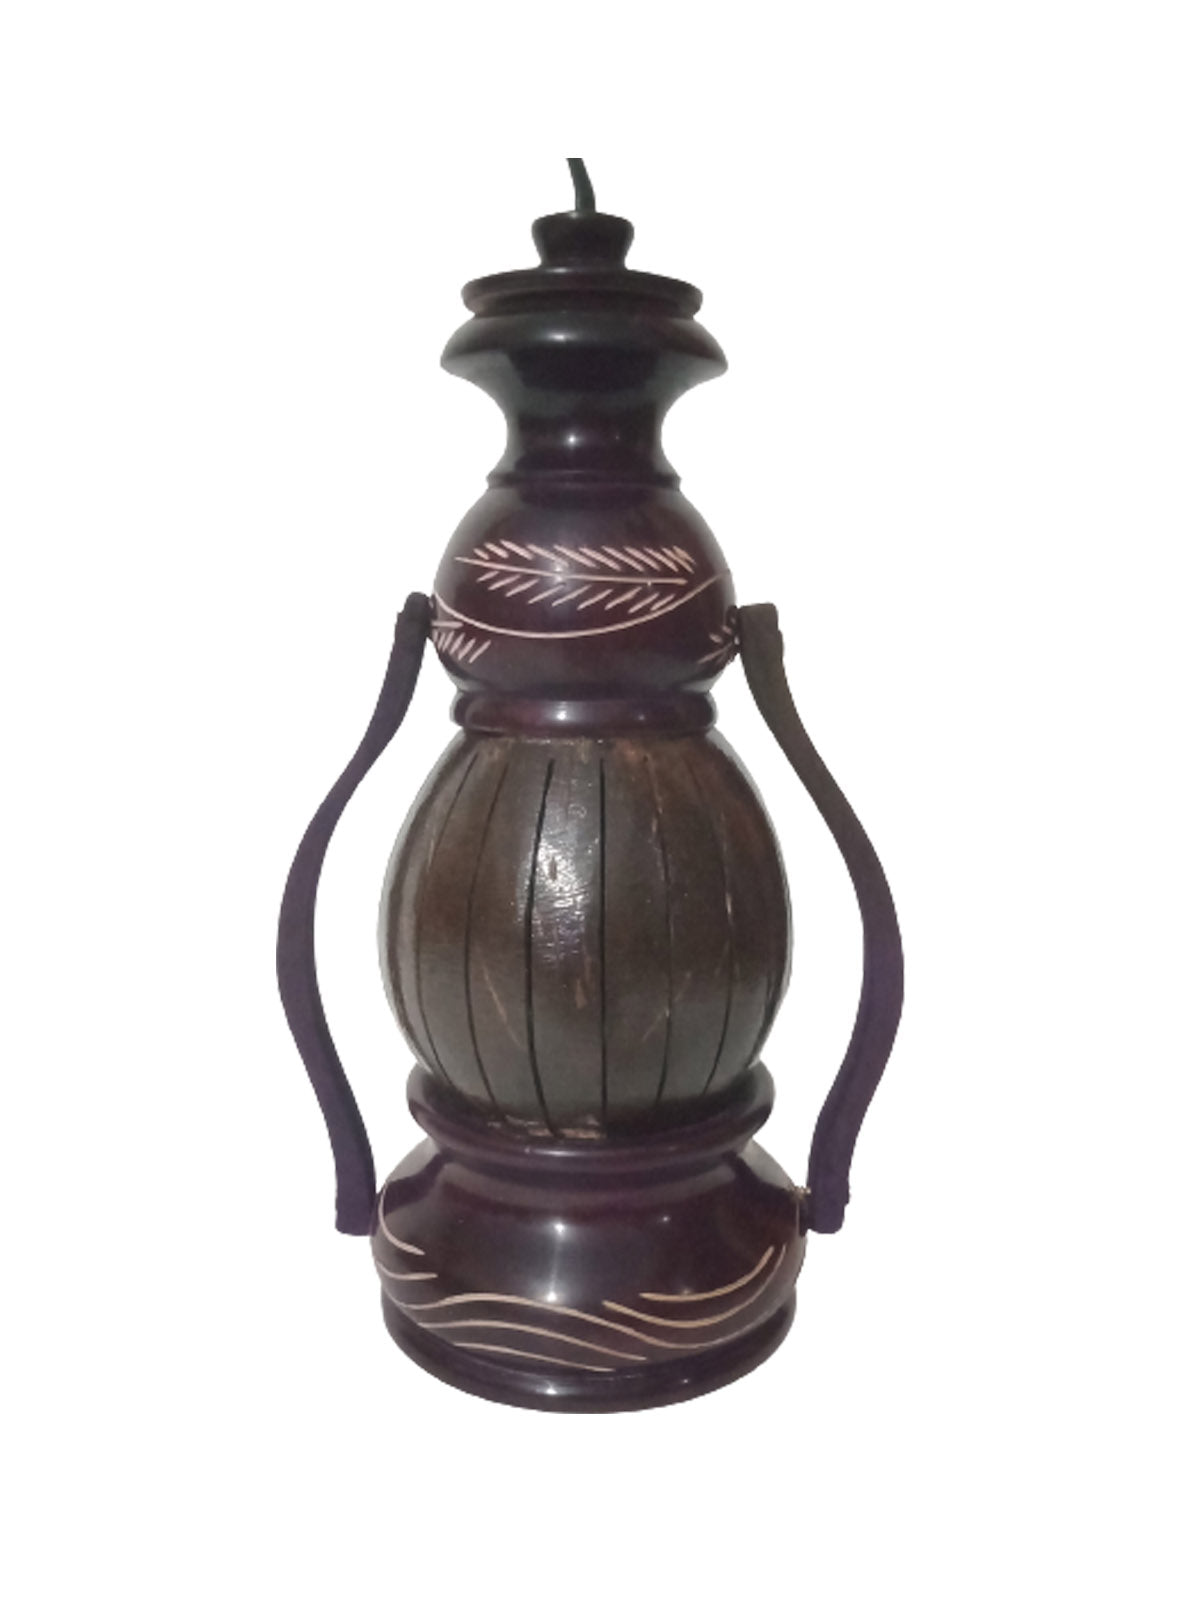 Coconut Shell Made Handcrafted Hurricane Lamp Shade